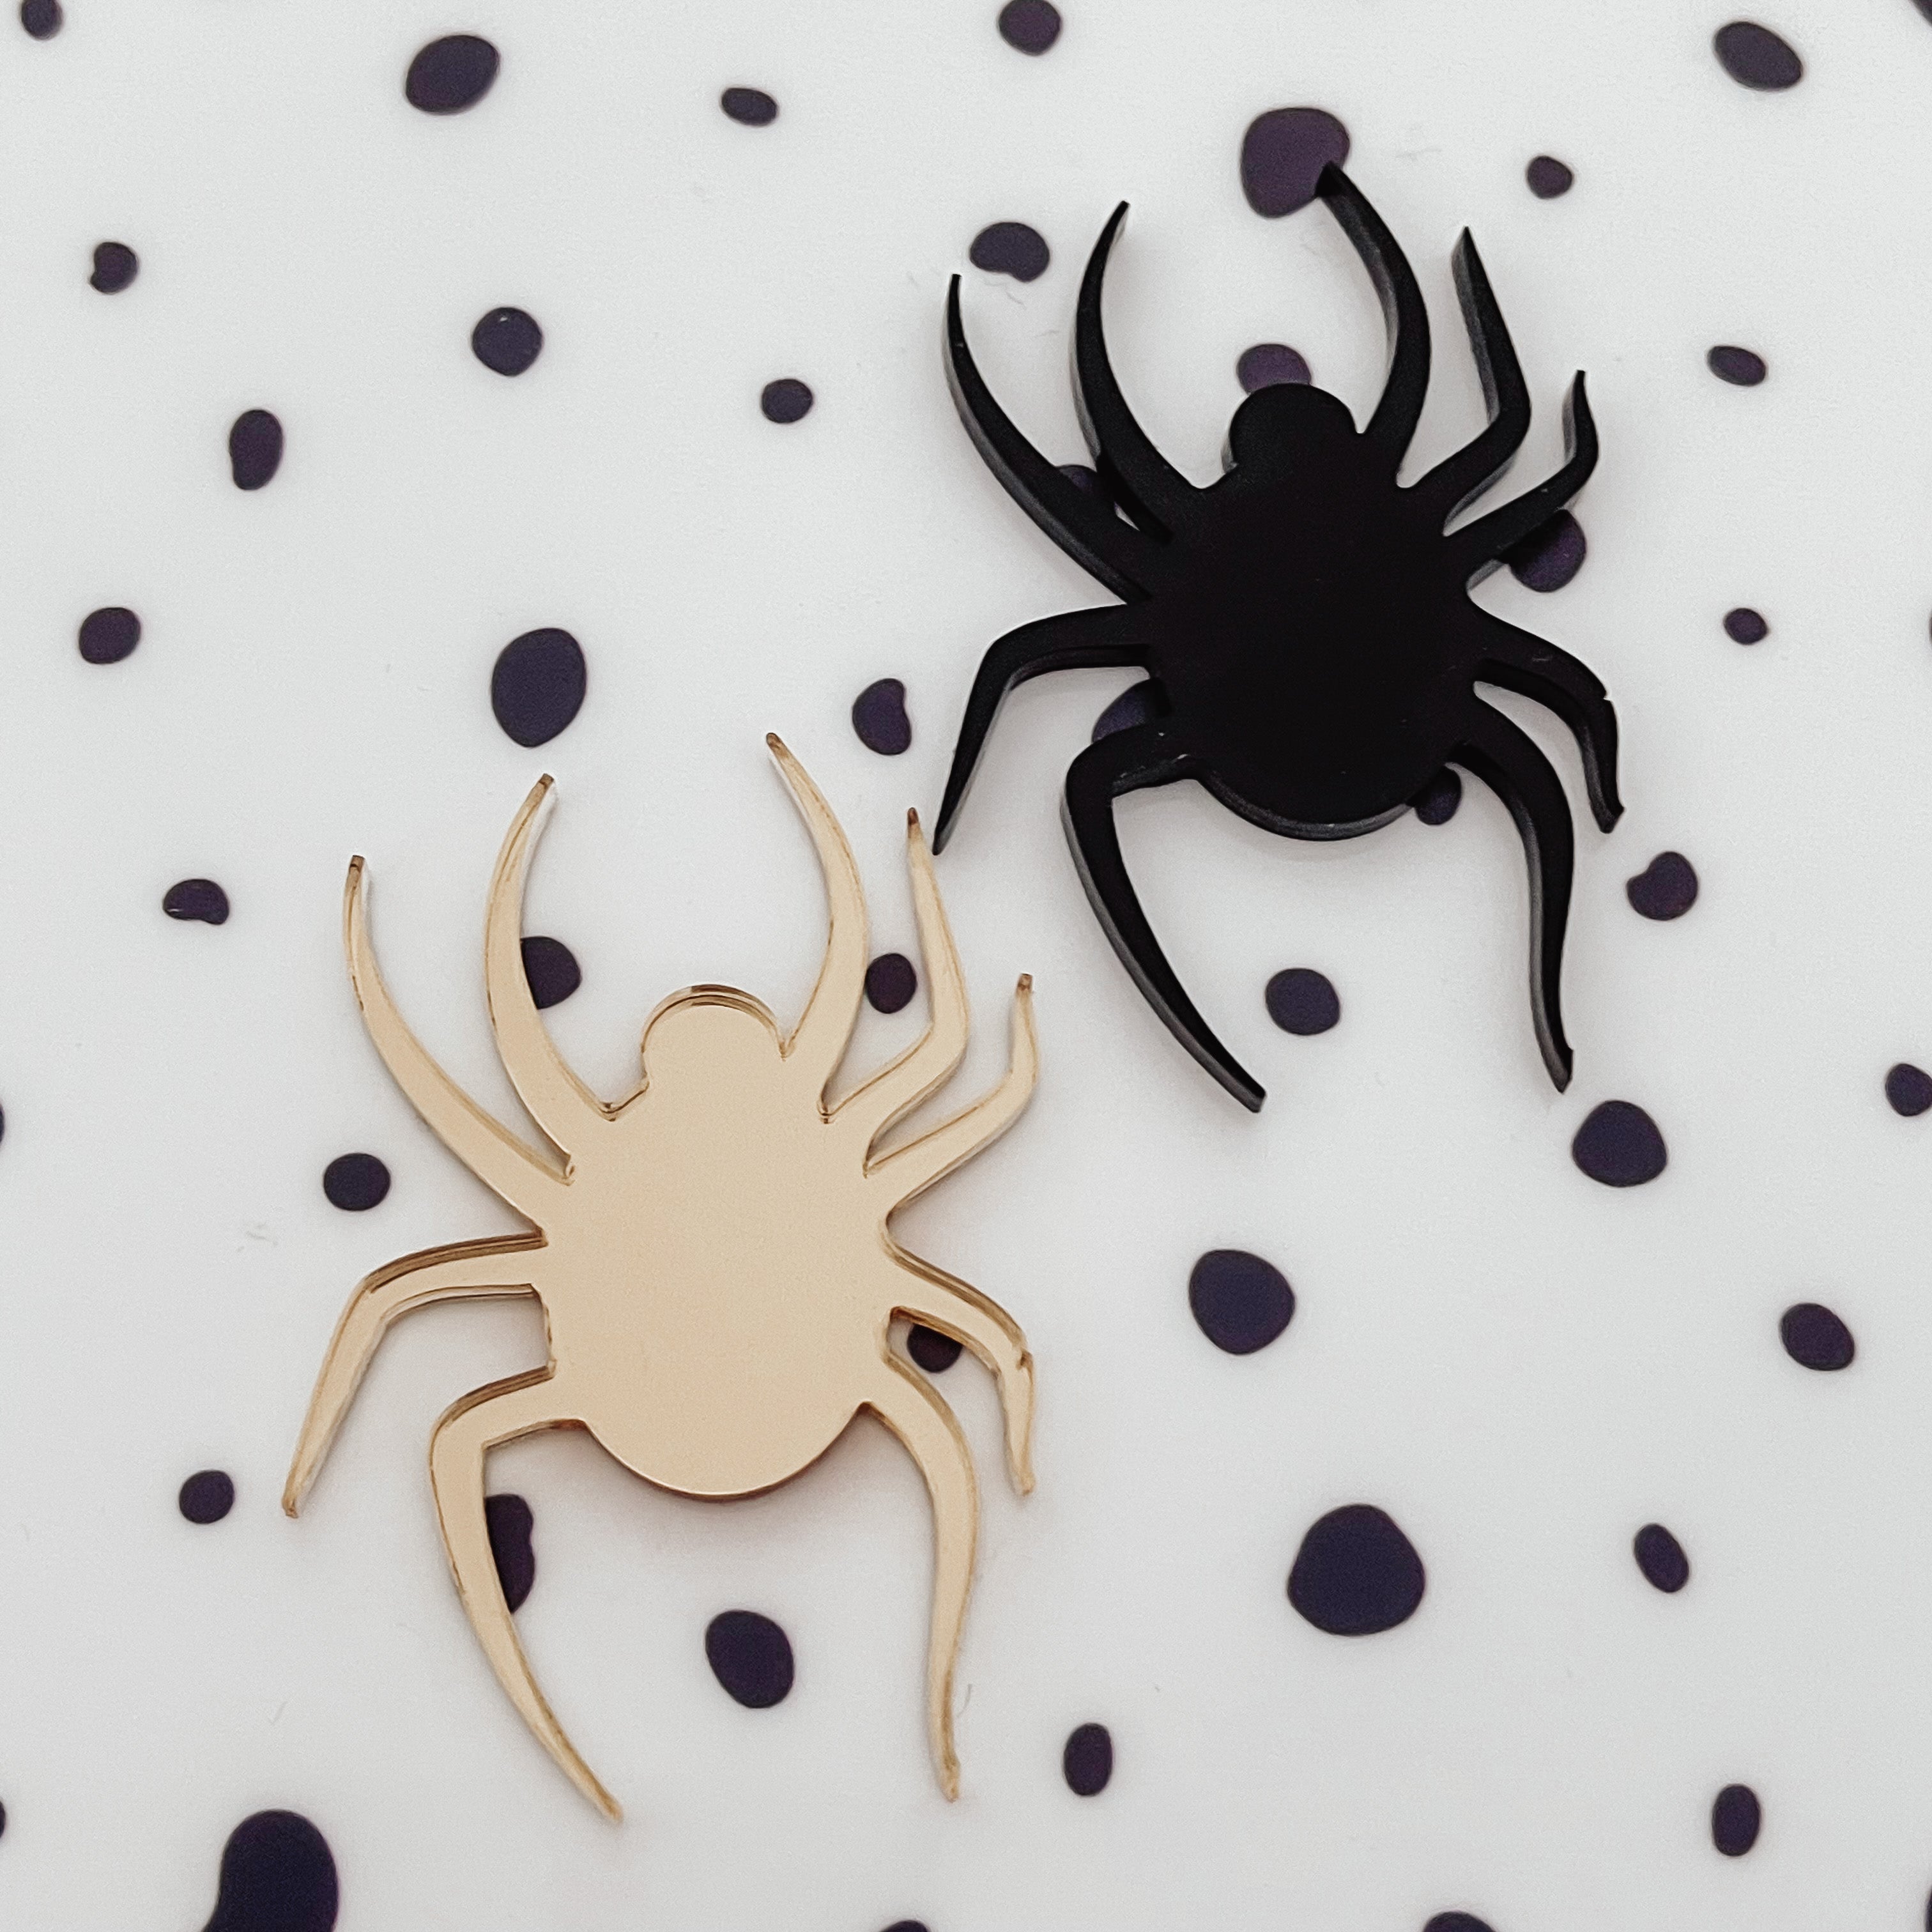 Spider Halloween Cupcake Toppers